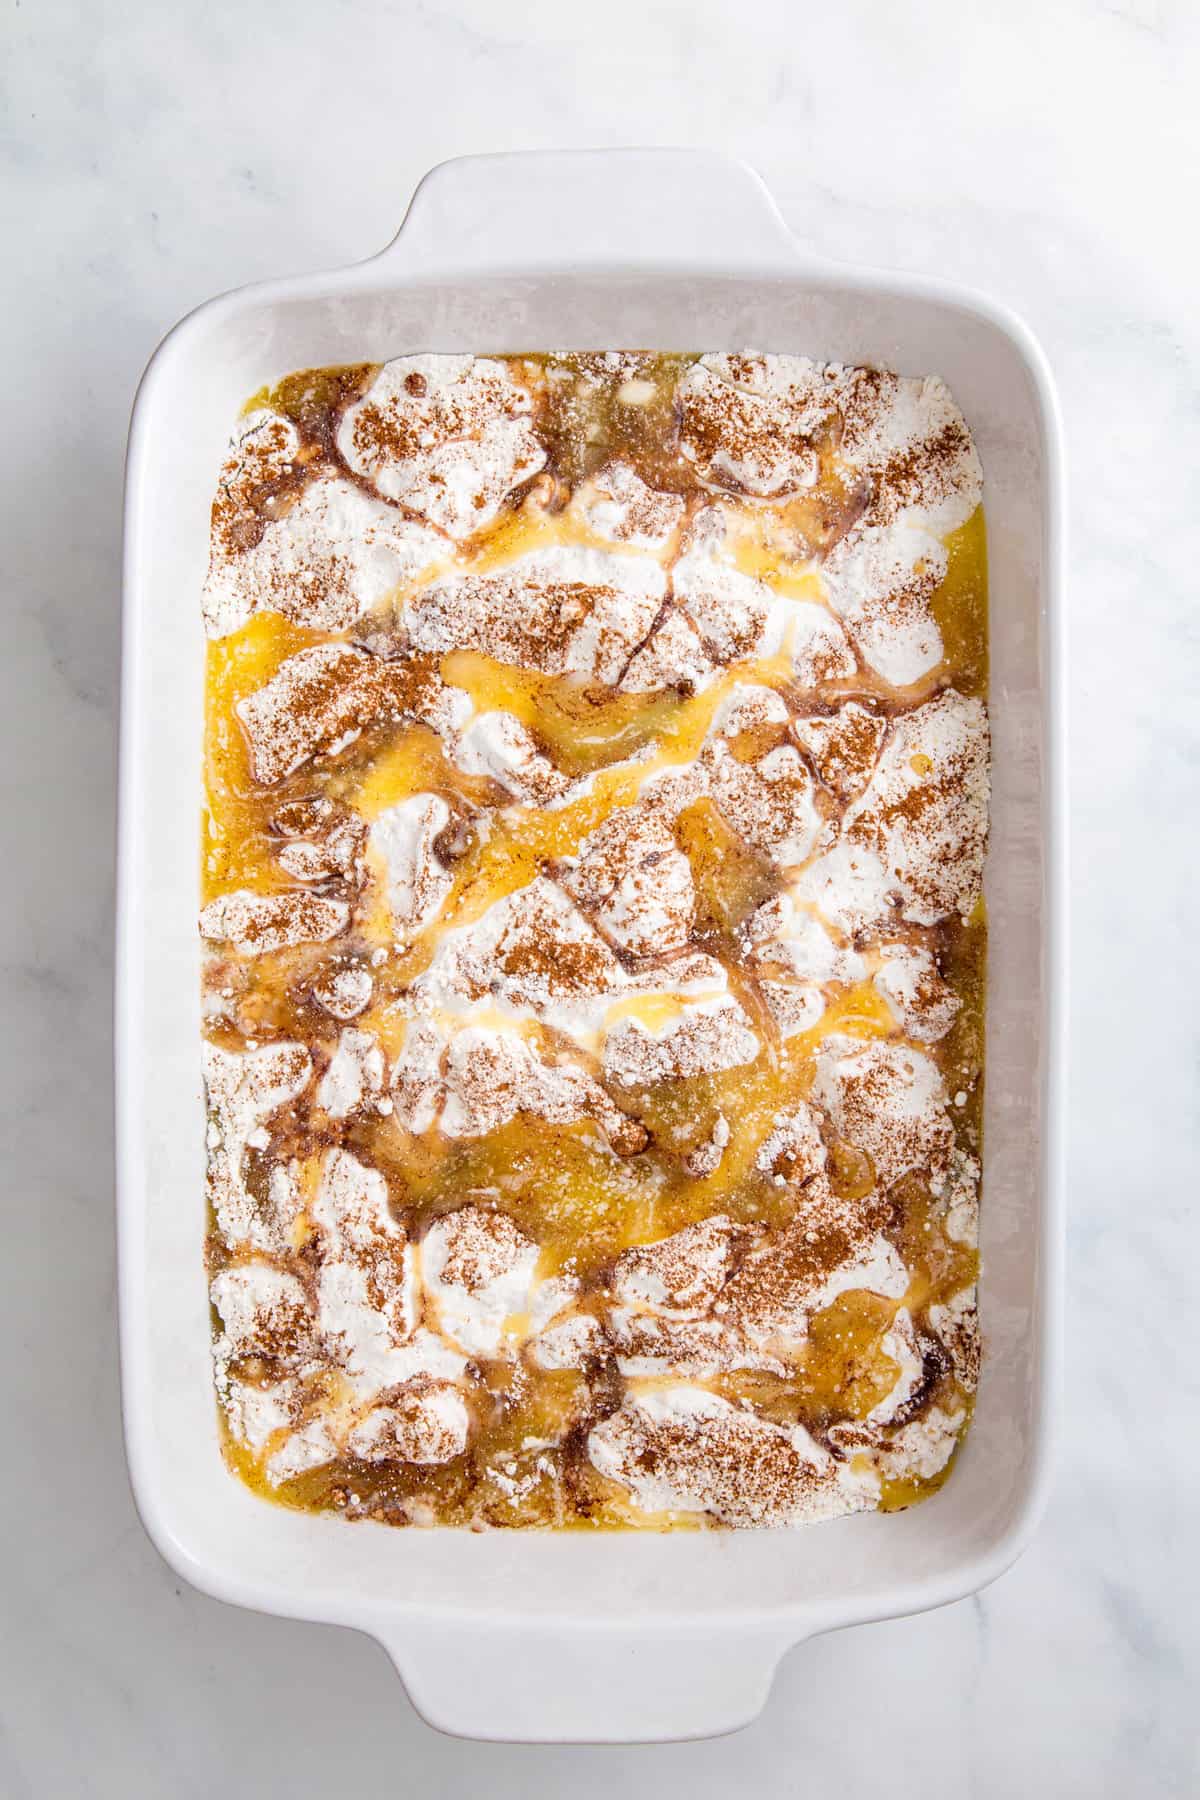 9 by 13 inch casserole dish with canned peaches at the bottom and topped evenly with white cake mix and sprinkled with cinnamon sugar and melted butter